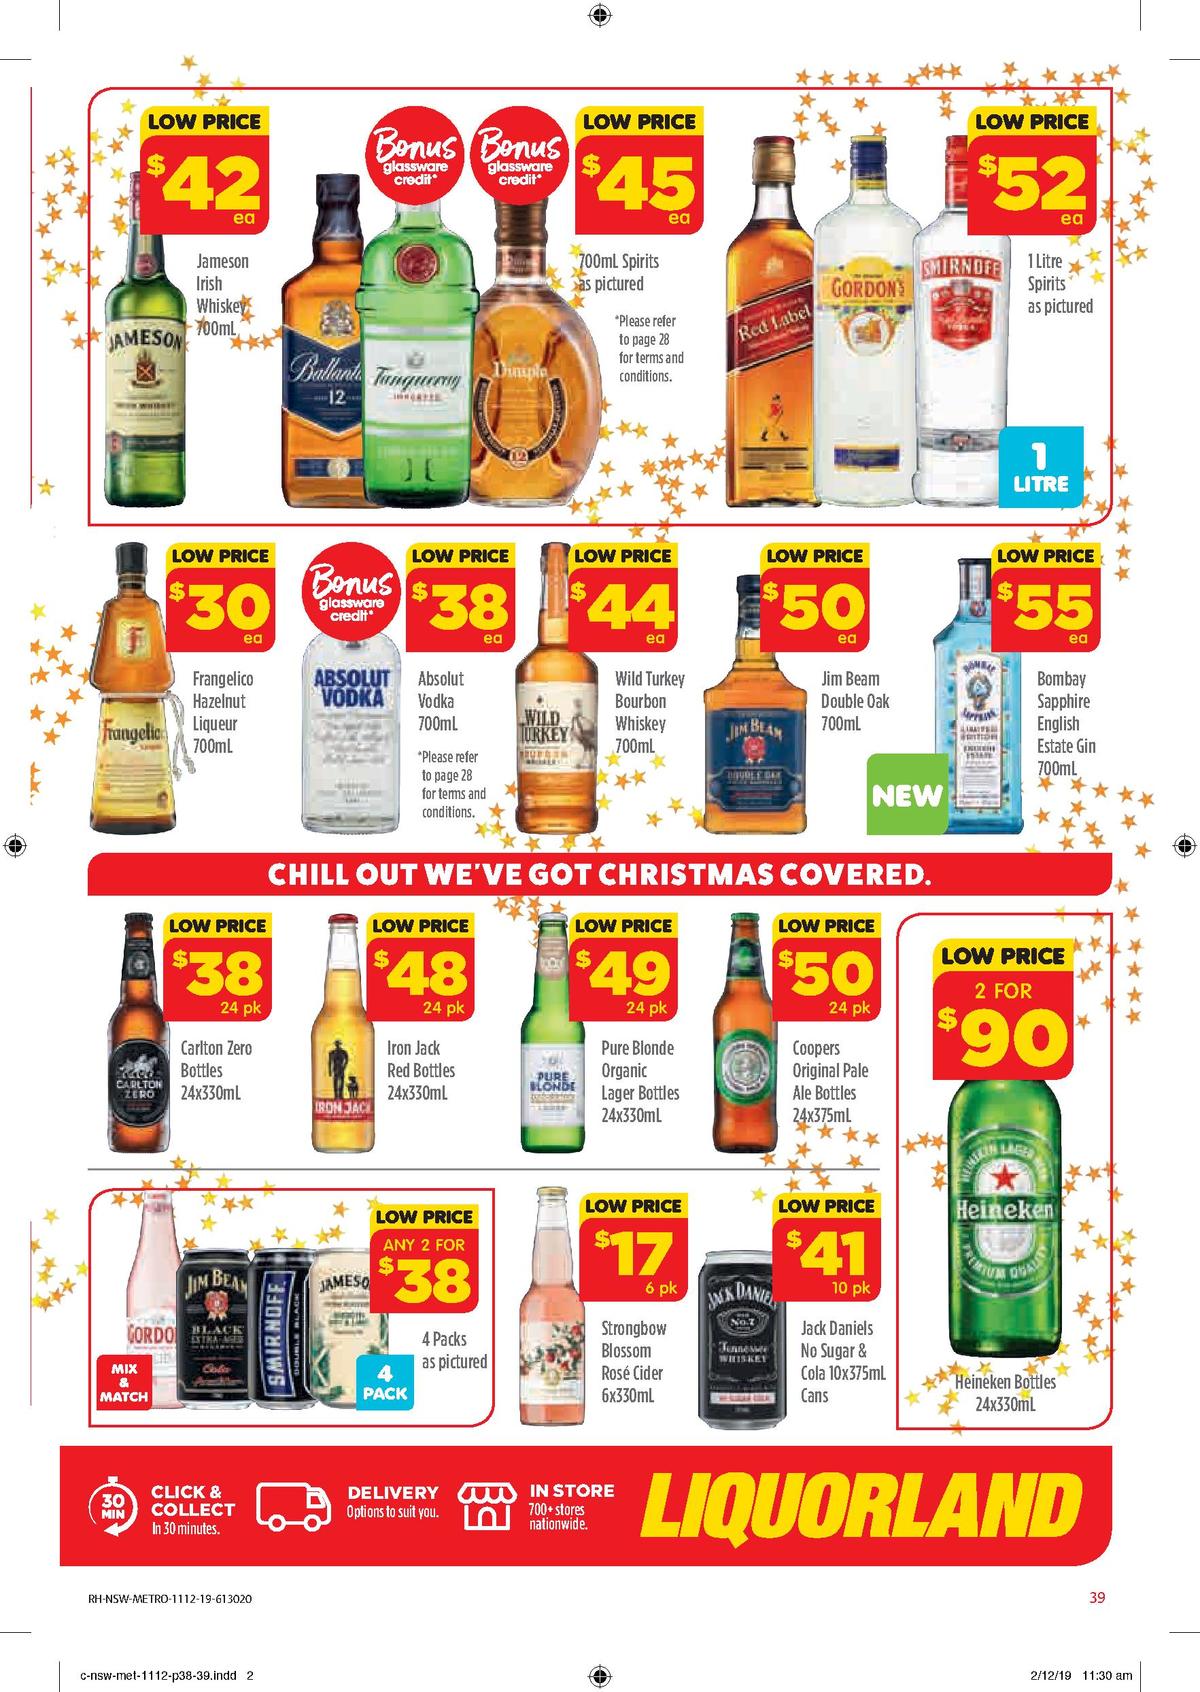 Coles Catalogues from 11 December